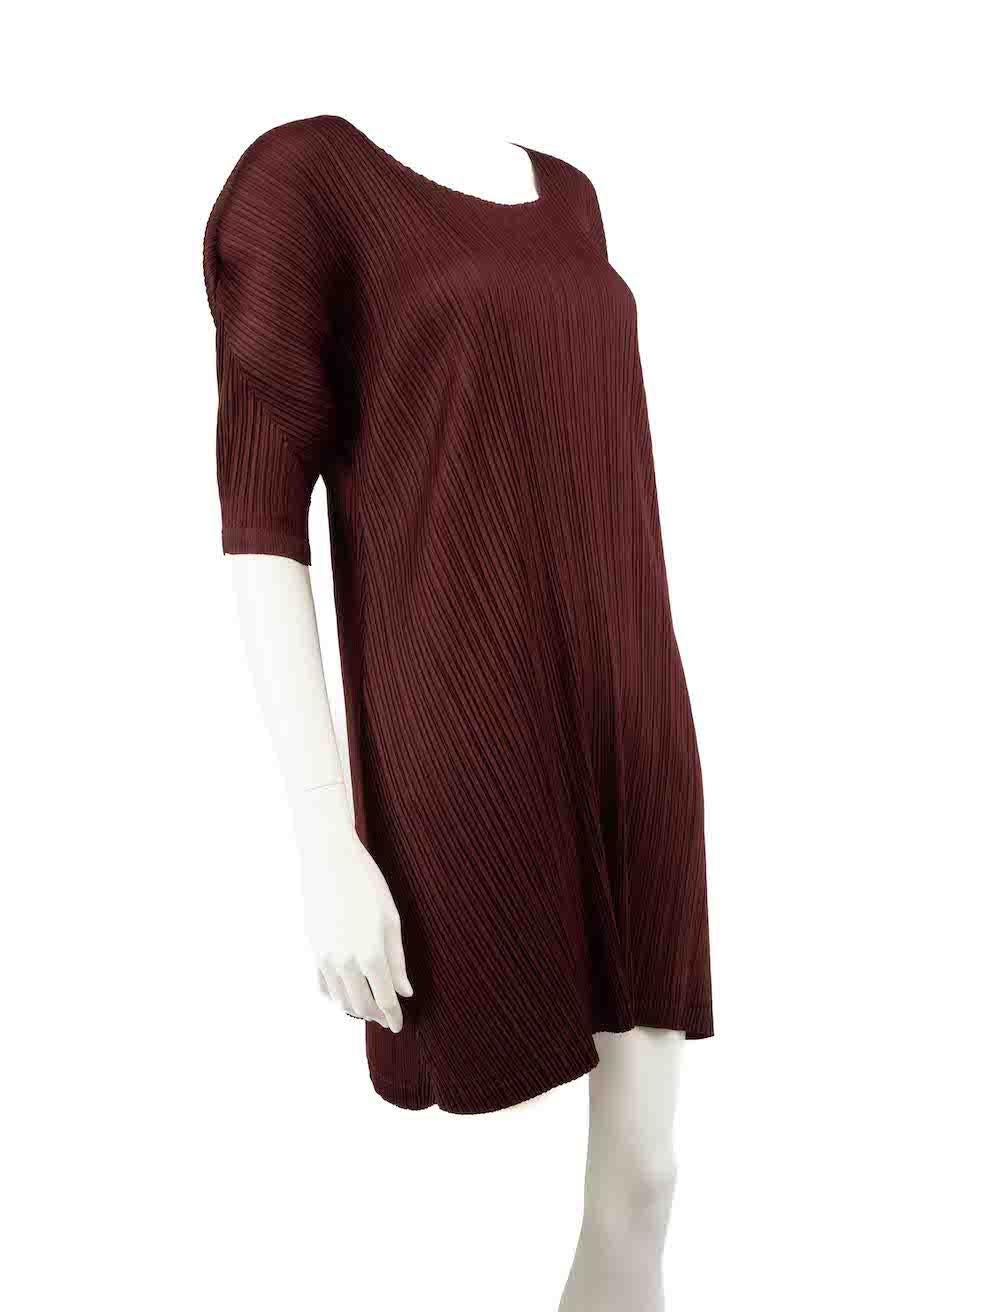 CONDITION is Very good. Hardly any visible wear to dress is evident on this used Pleats Please by Issey Miyake designer resale item.
 
 
 
 Details
 
 
 Burgundy
 
 Polyester
 
 Knee length dress
 
 Pleated accent
 
 Round neckline
 
 Stretchy
 
 
